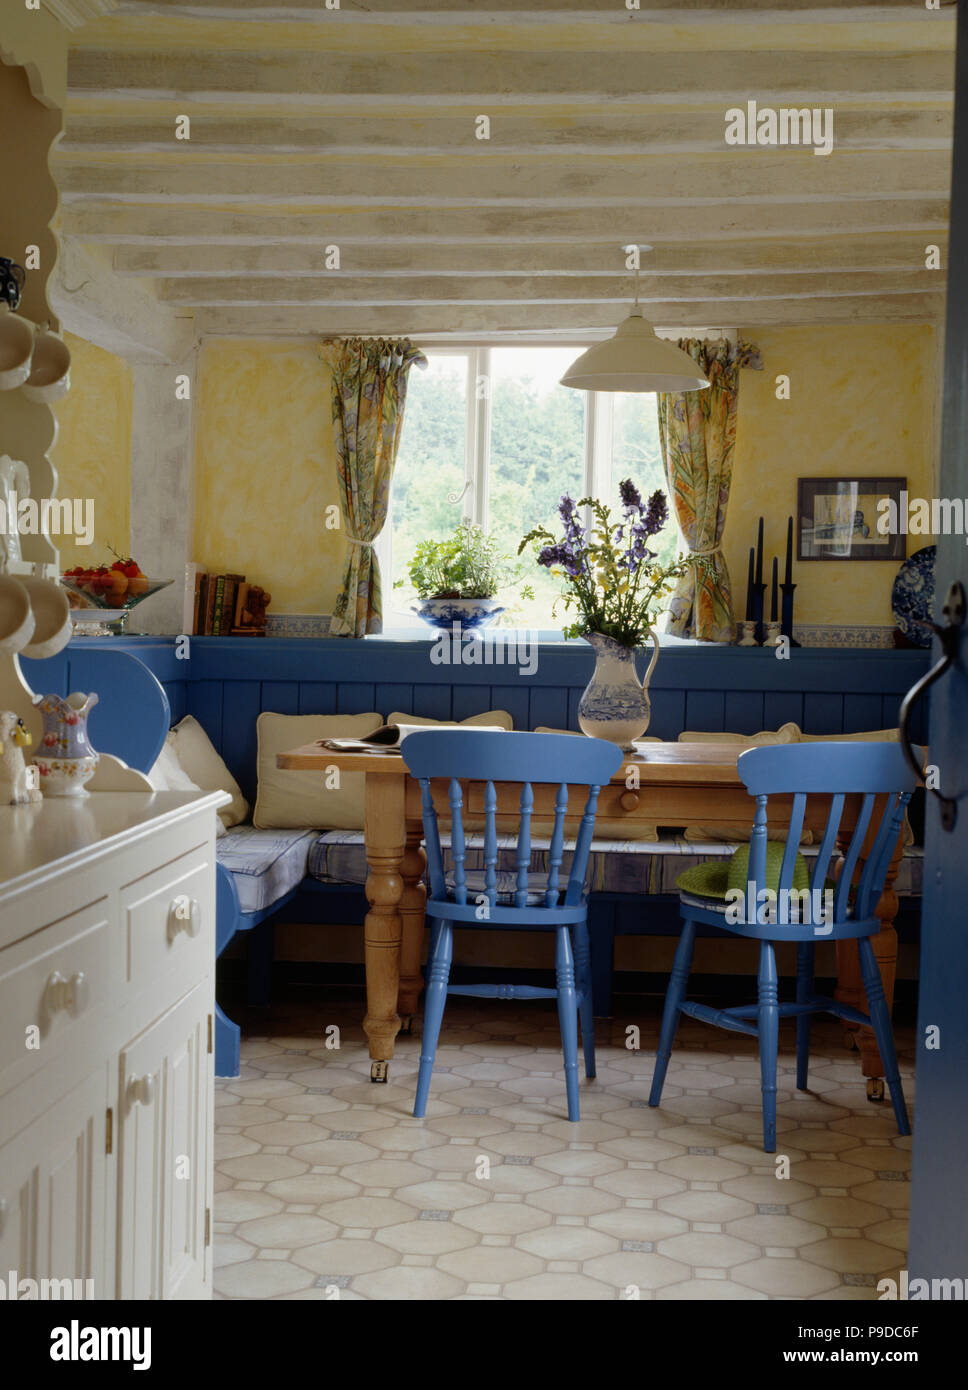 Bright Blue Chiars At Pine Table In Pale Yellow Cottage Living